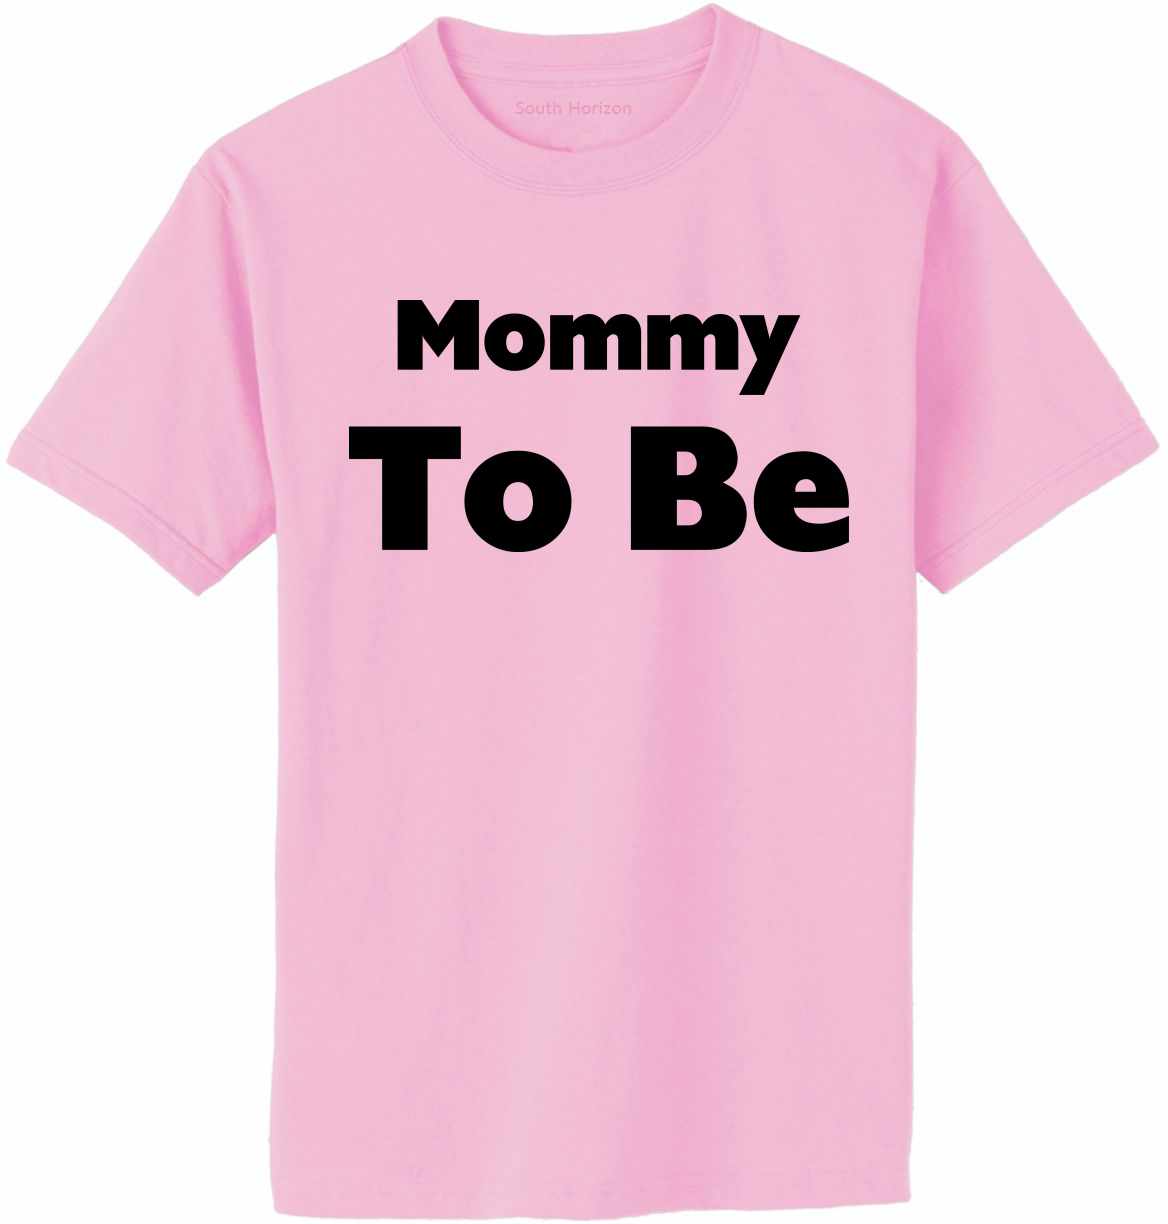 Mommy To Be Adult T-Shirt